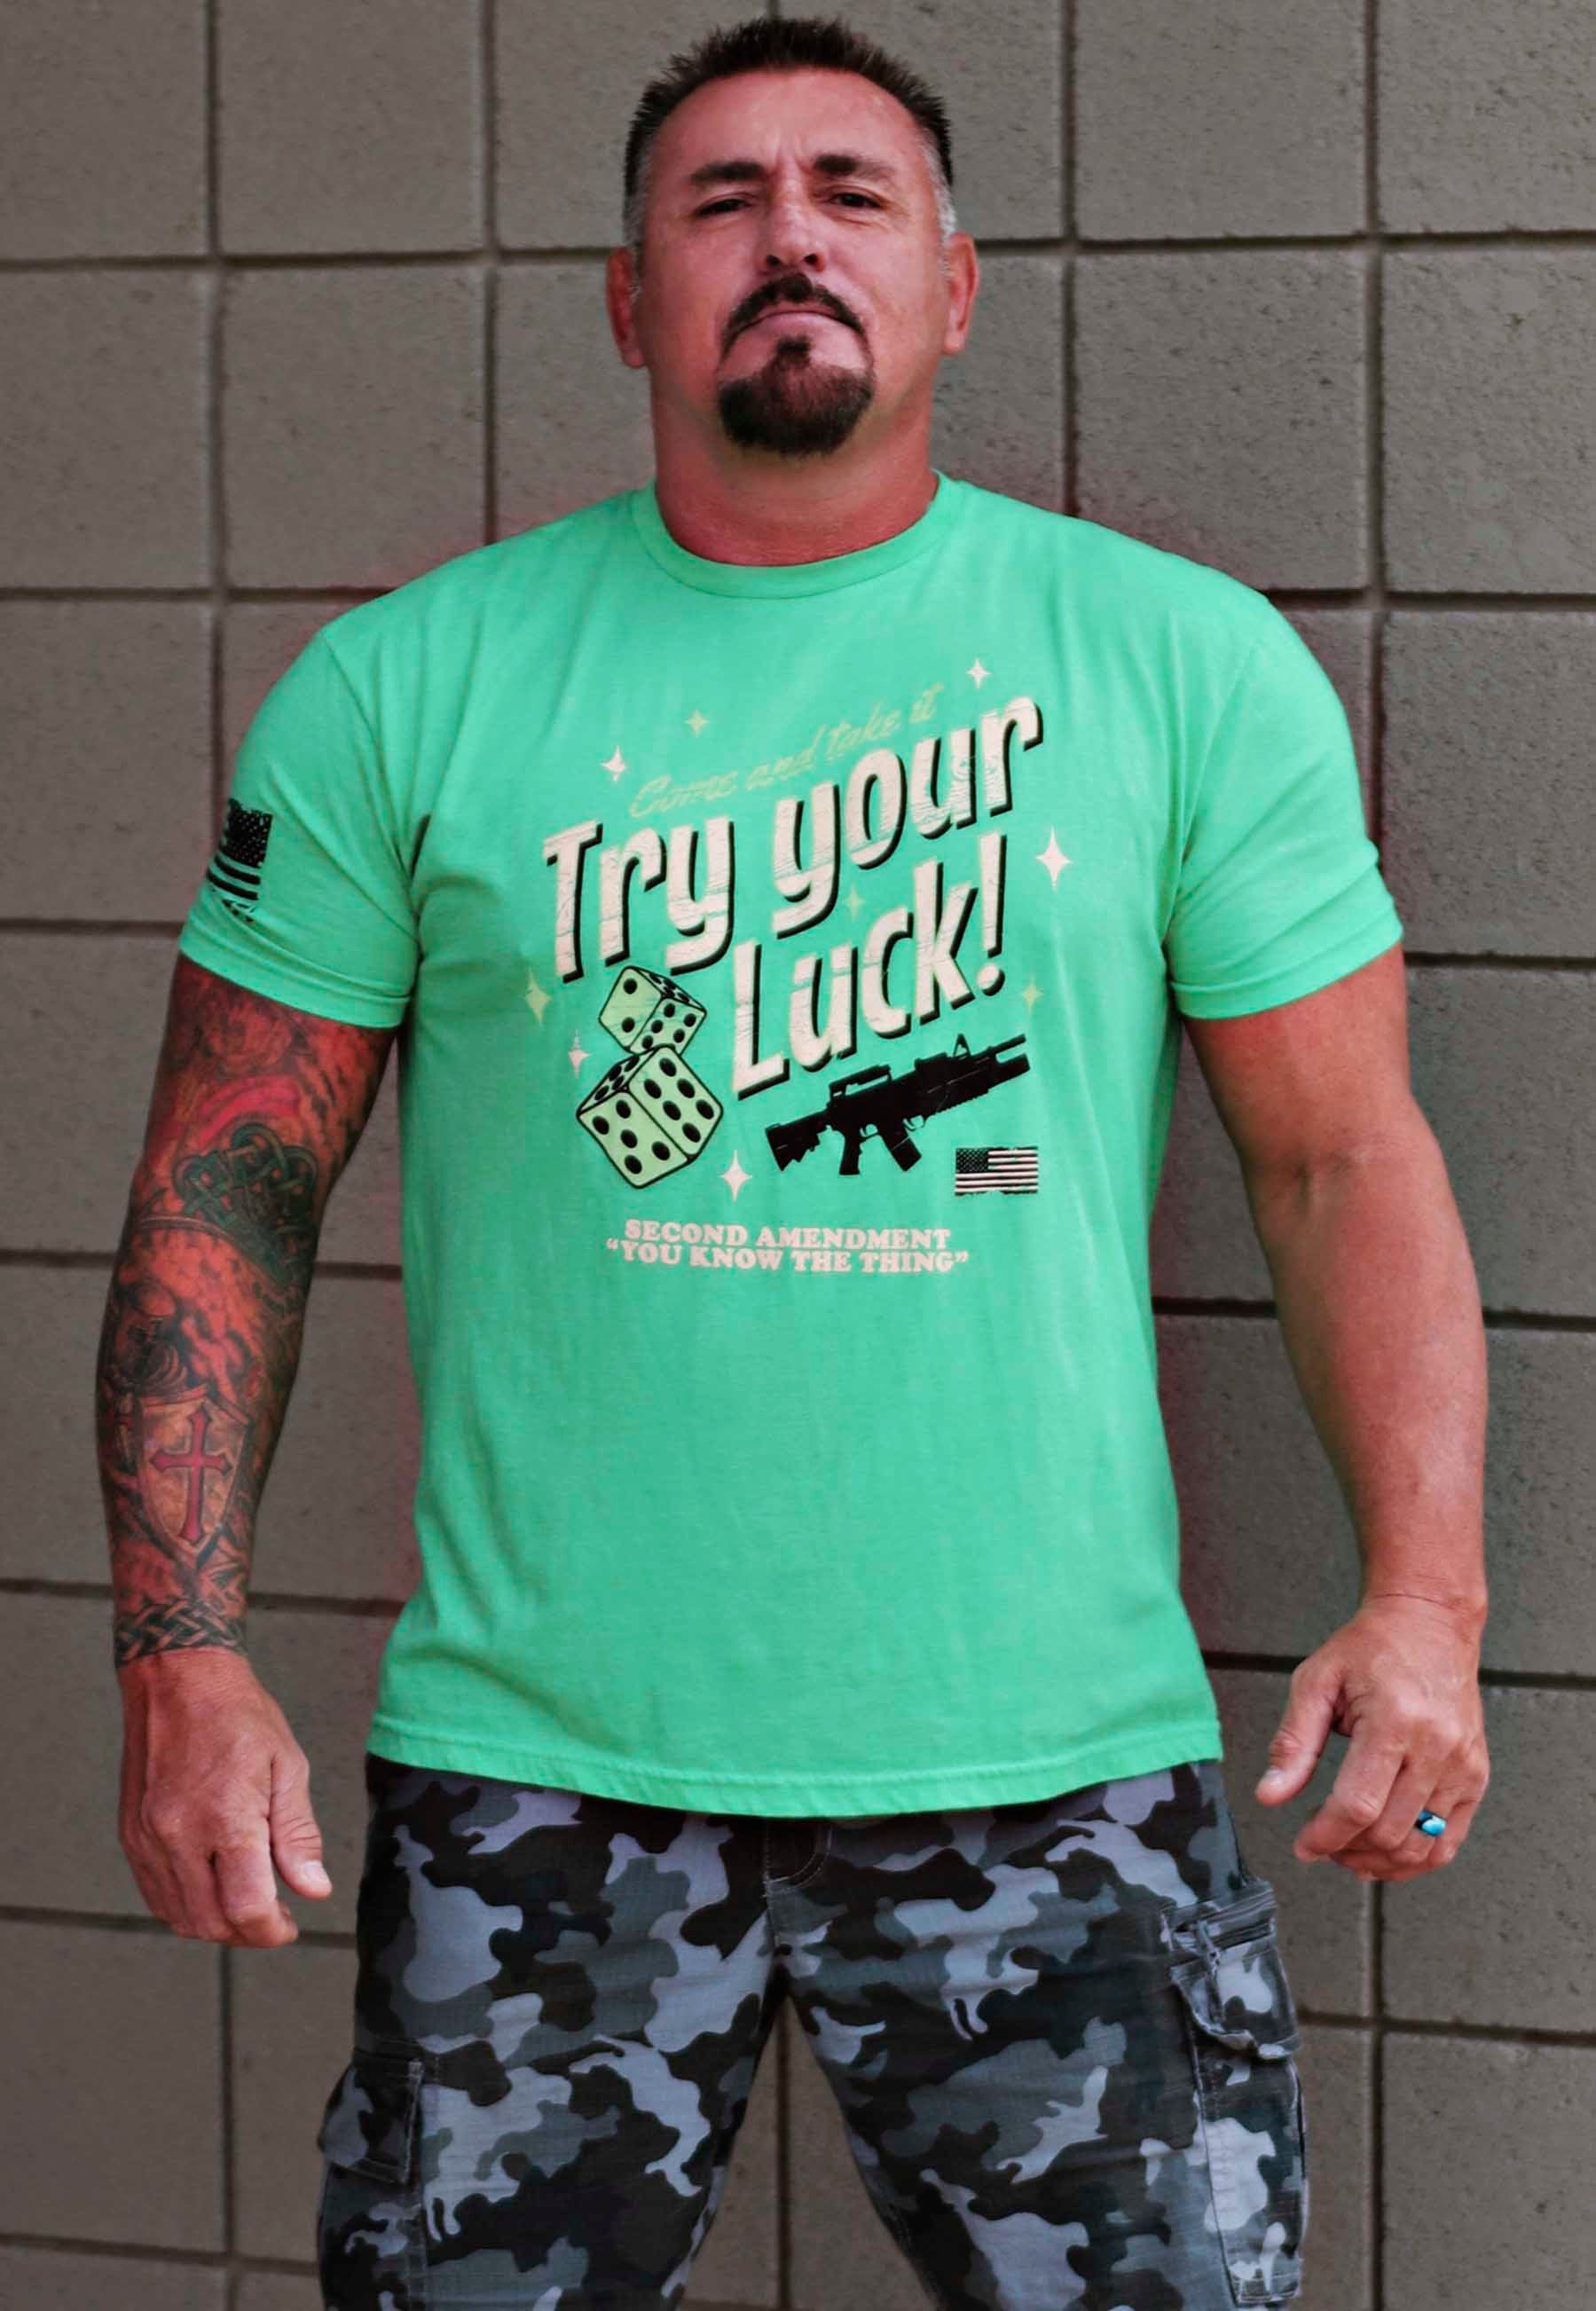 World Champion Shannon Ritch wearing Armed AF tee shirt